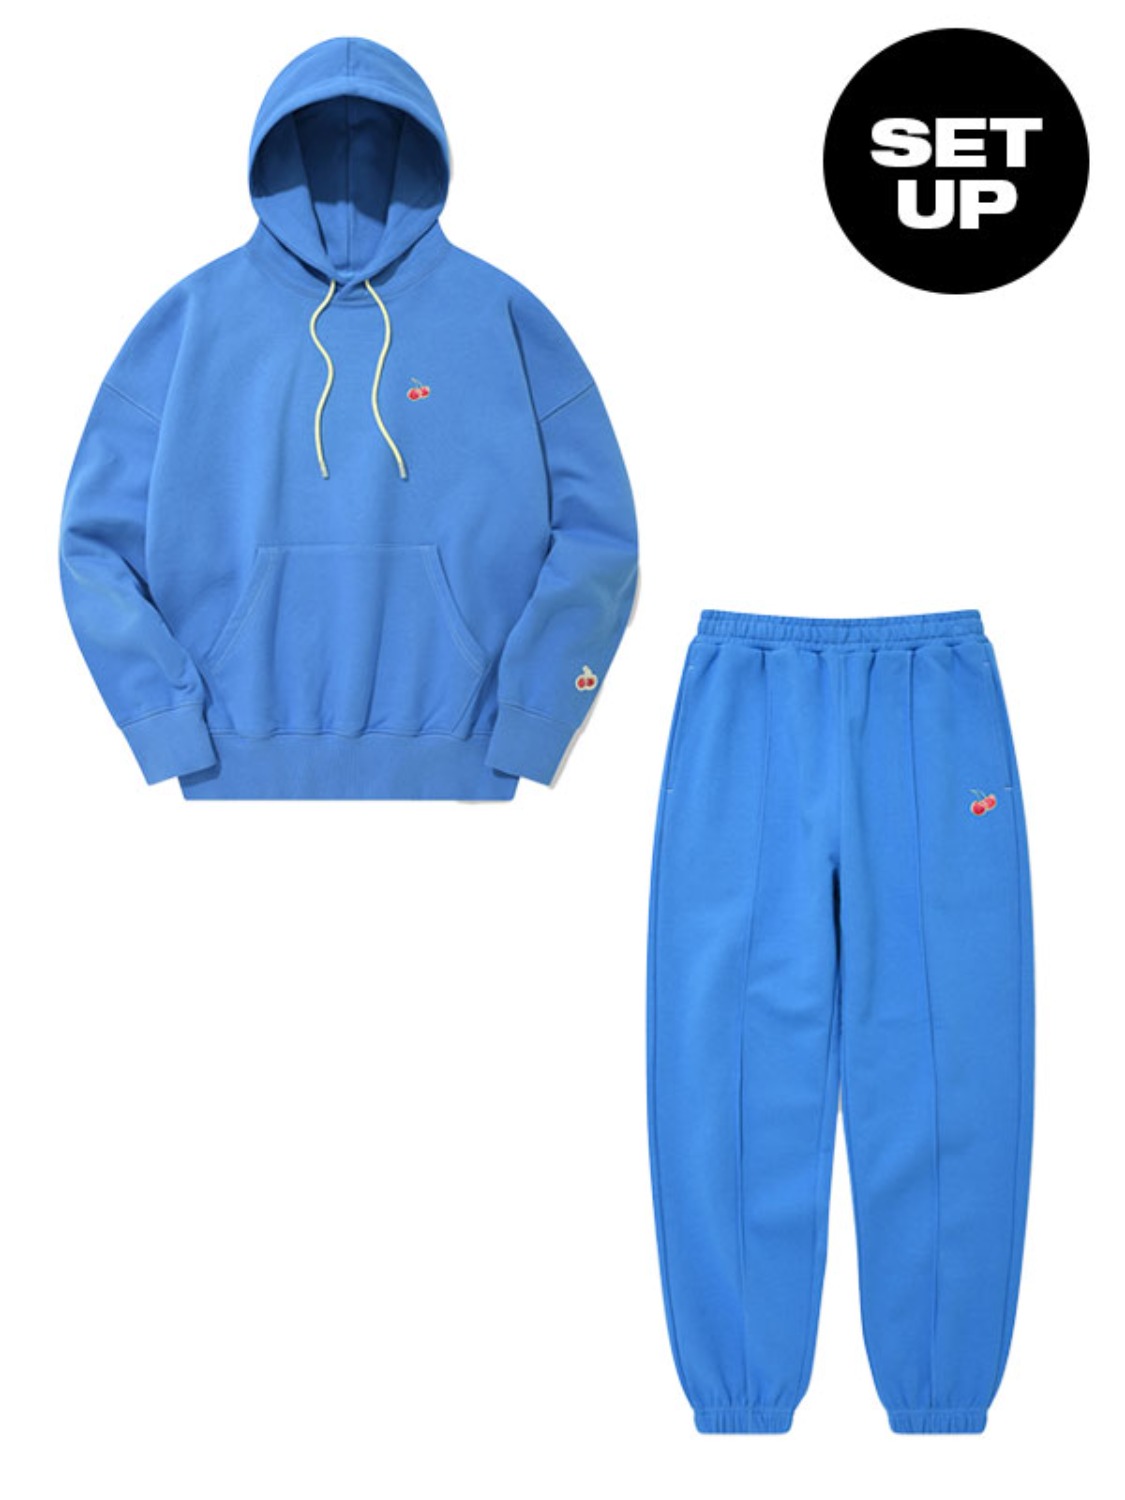 SMALL CHERRY HOODIE + SMALL CHERRY JOGGER PANTS [BLUE + BLUE]